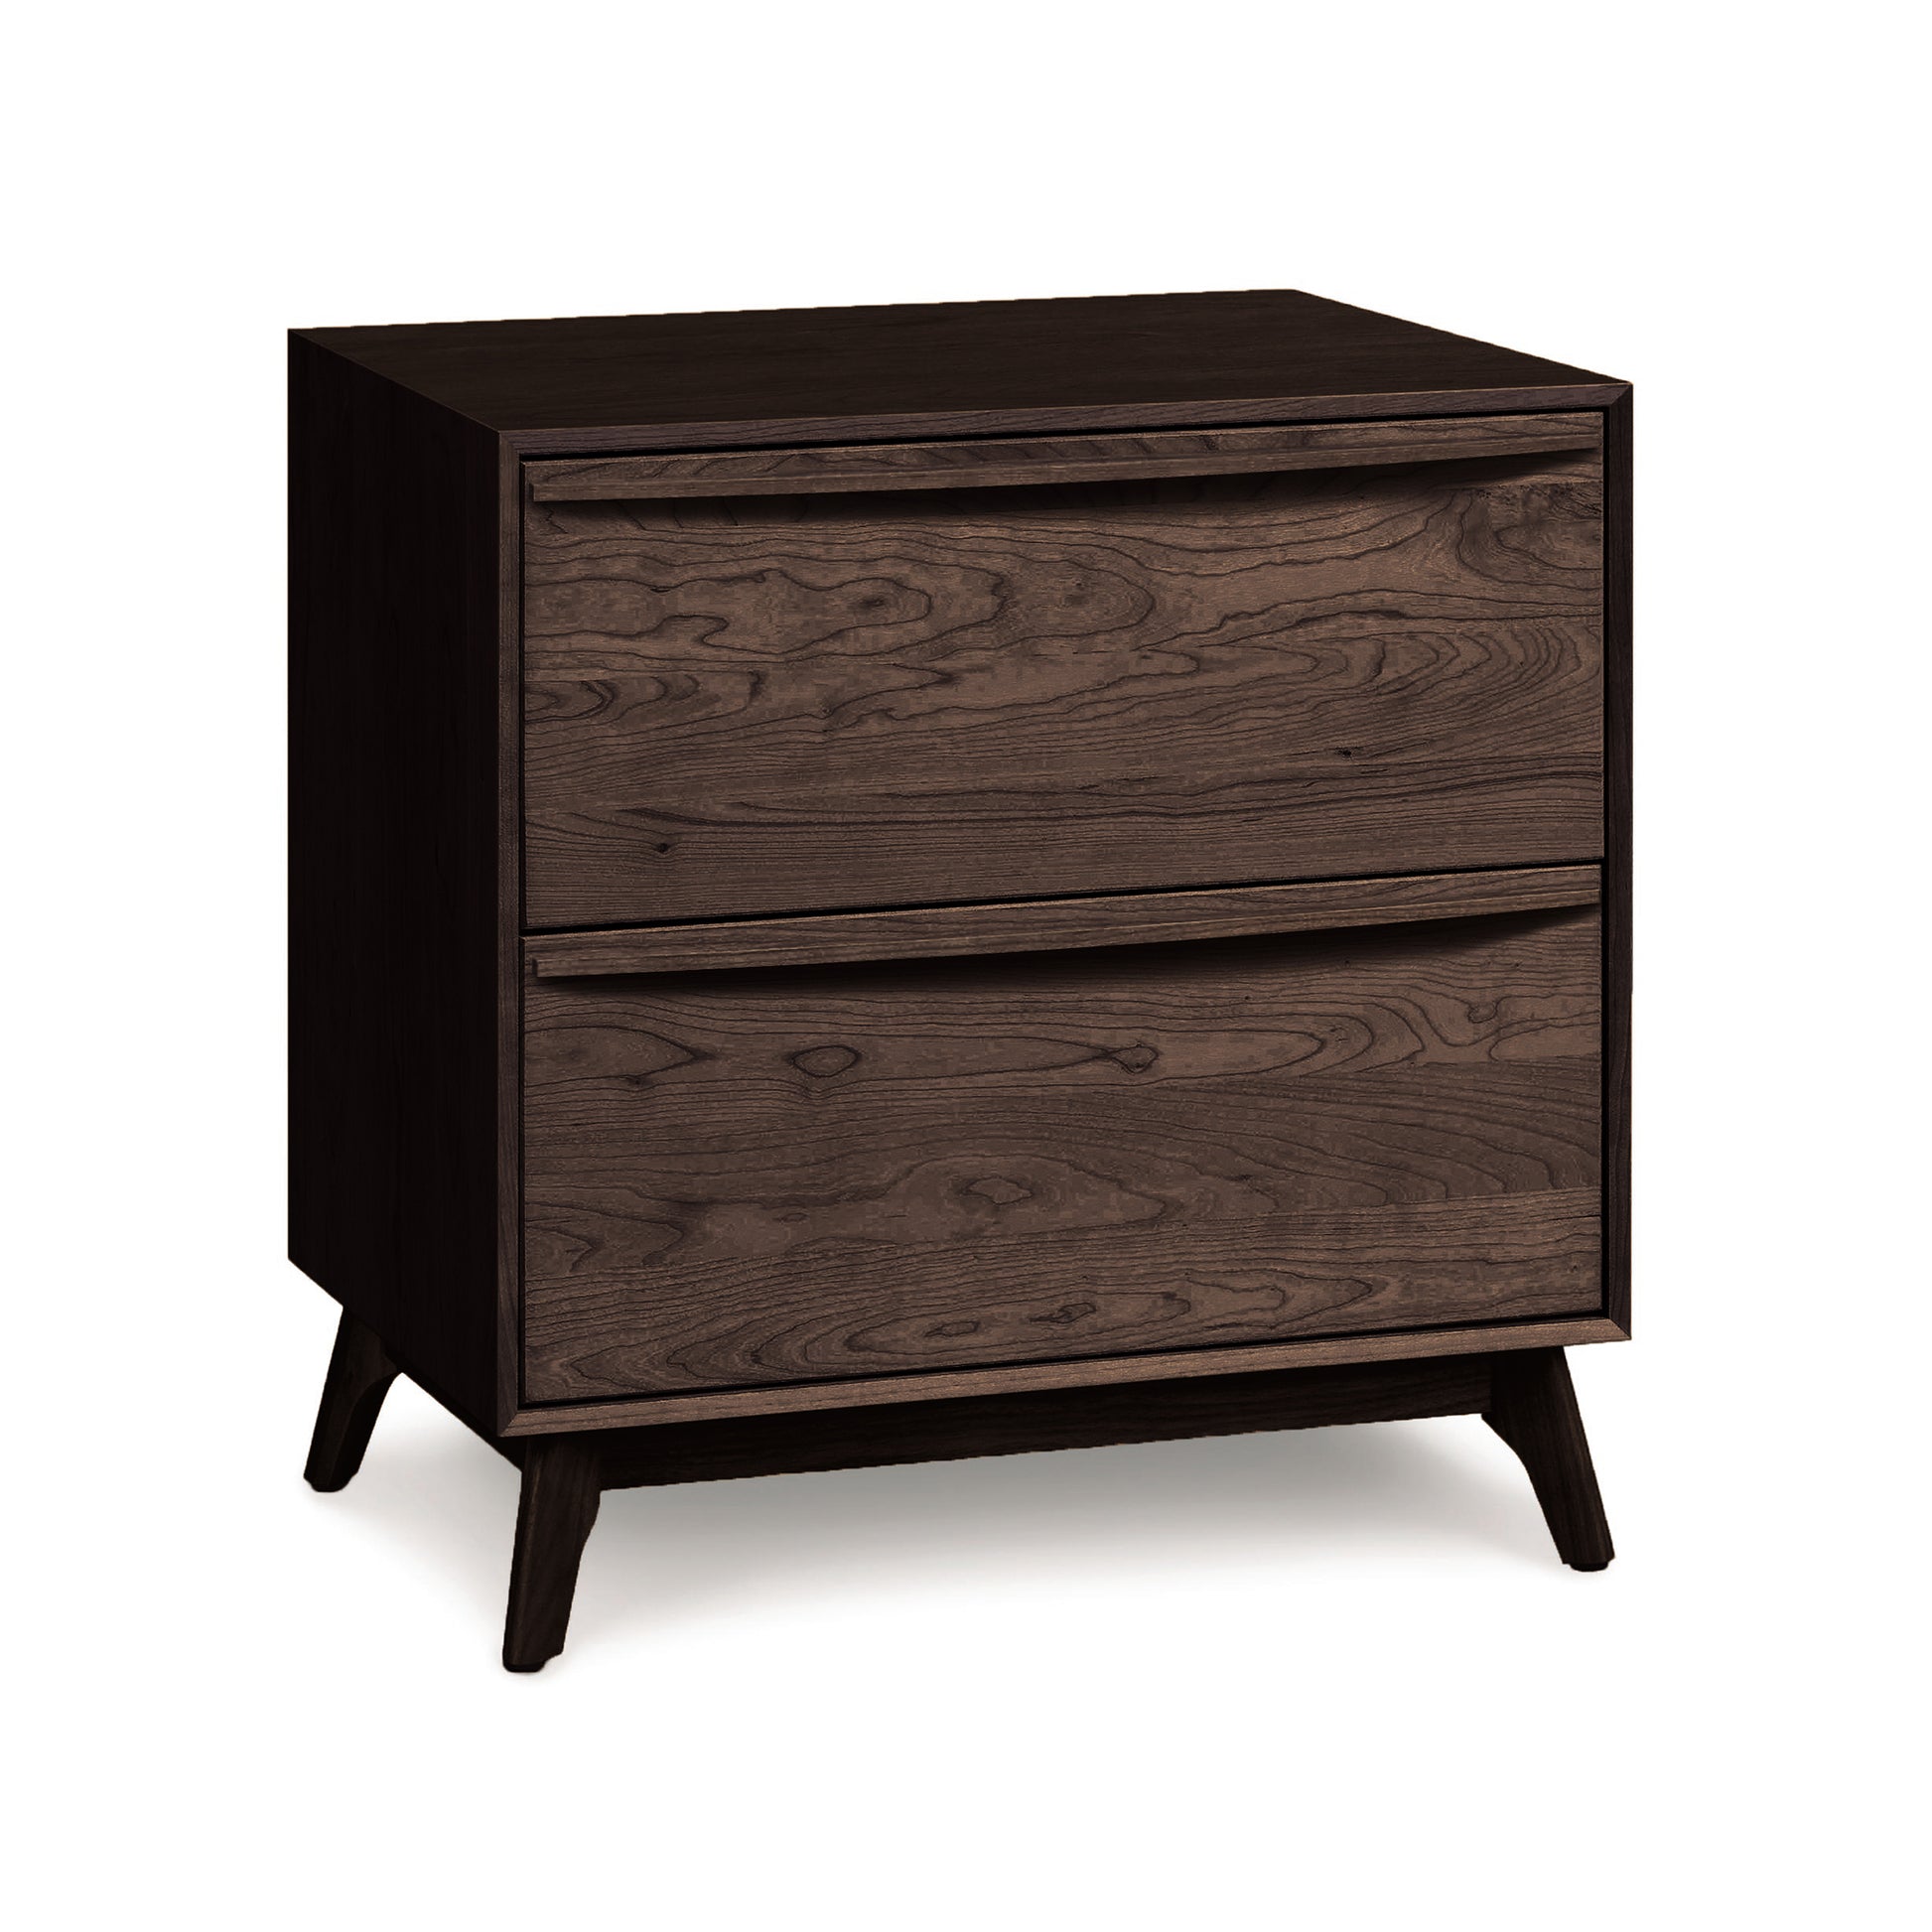 A Copeland Furniture Catalina 2-Drawer Nightstand made from solid natural hardwoods with angled legs isolated on a white background.